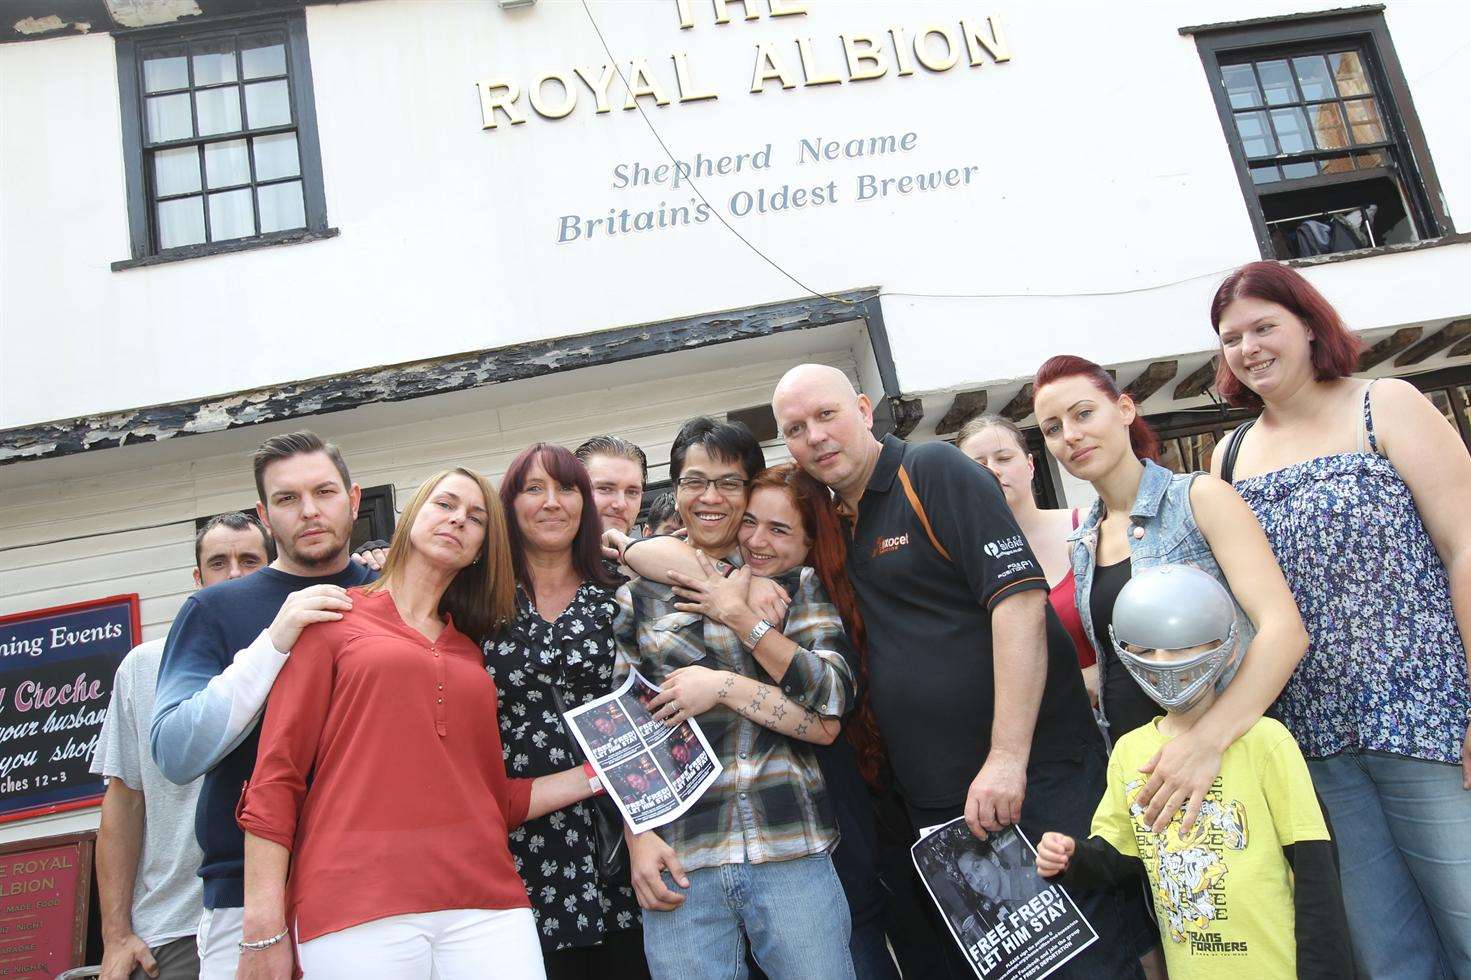 Fred Buenavista, who faces deportation, is reunited with friends, whilst on bail, outside The Royal Albion Pub in Maidstone, where he used to work